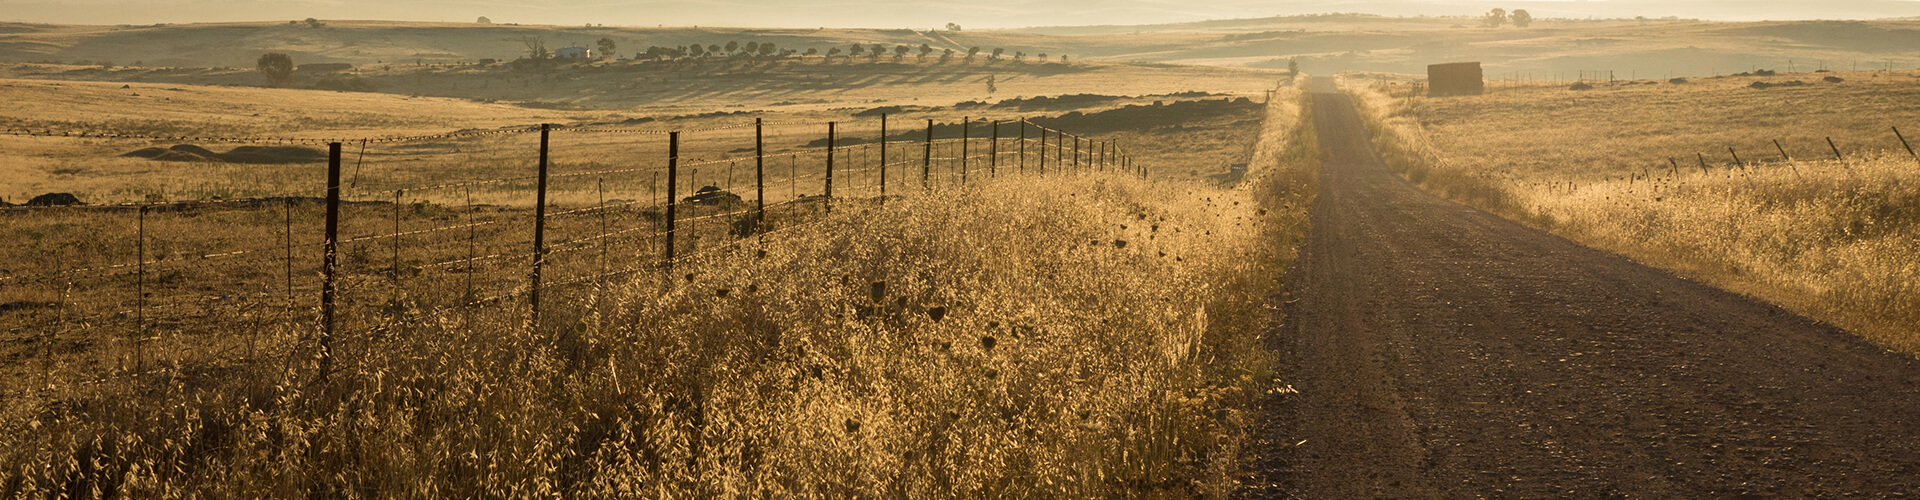 fence following a country road 